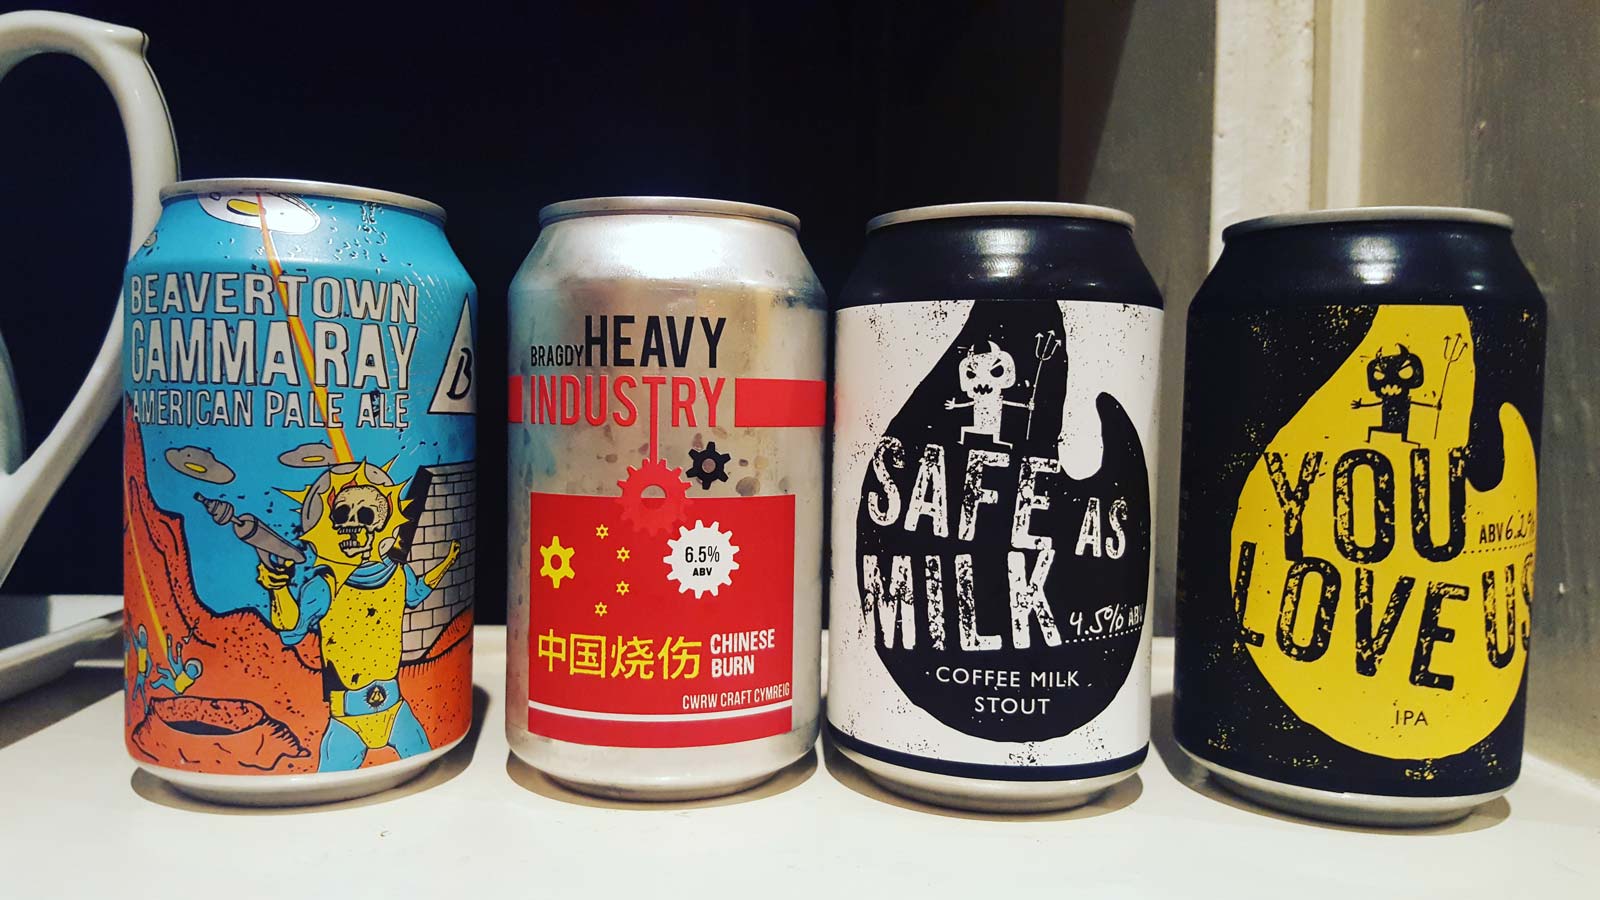 crafty devils brewing craft ale cans from Cardiff bottle shop